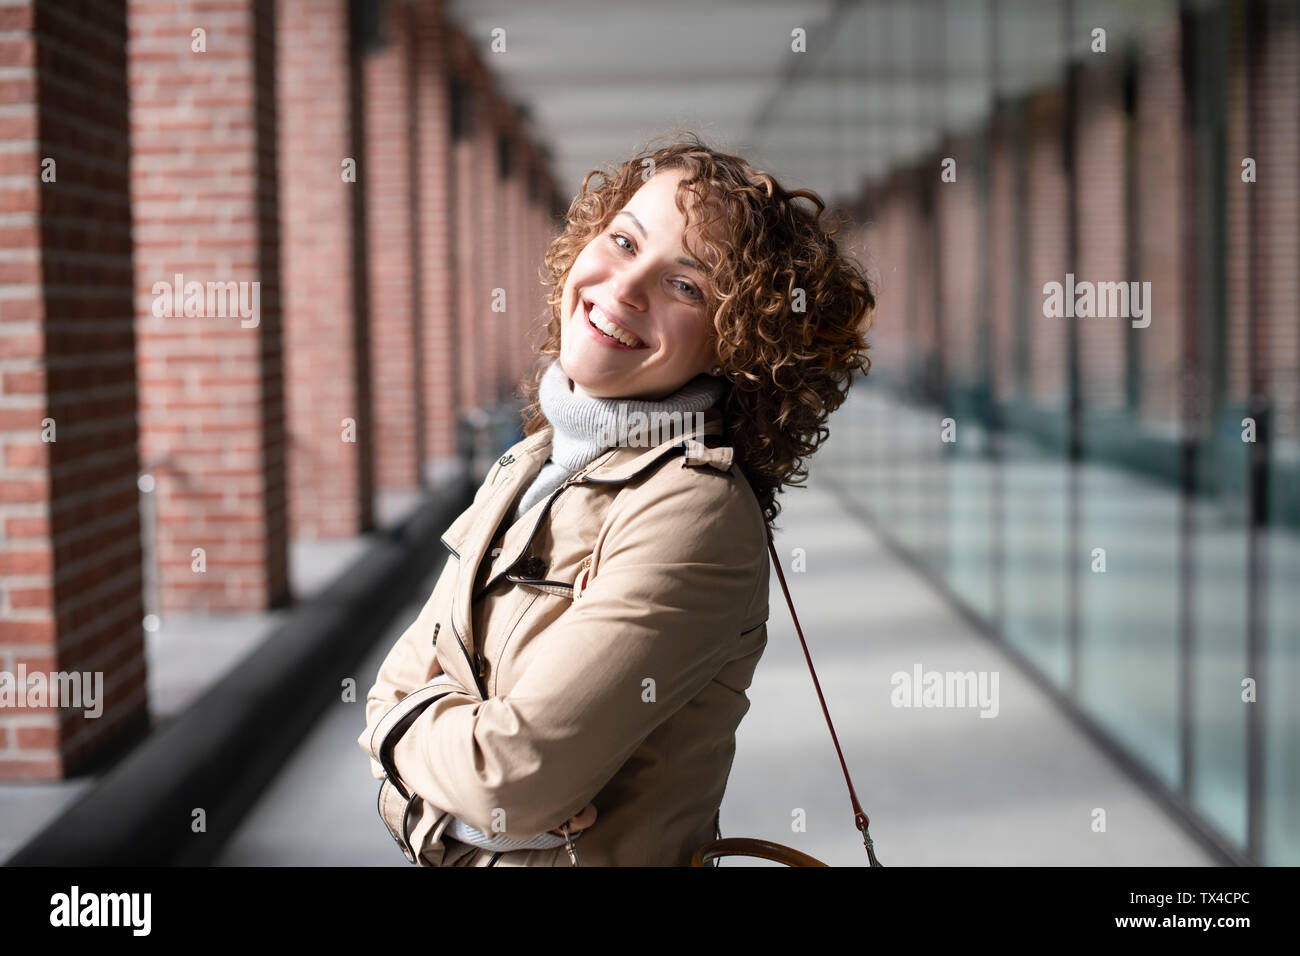 Portrait of happy woman with curly hair wearing beige trenchcoat and turtleneck pullover Stock Photo